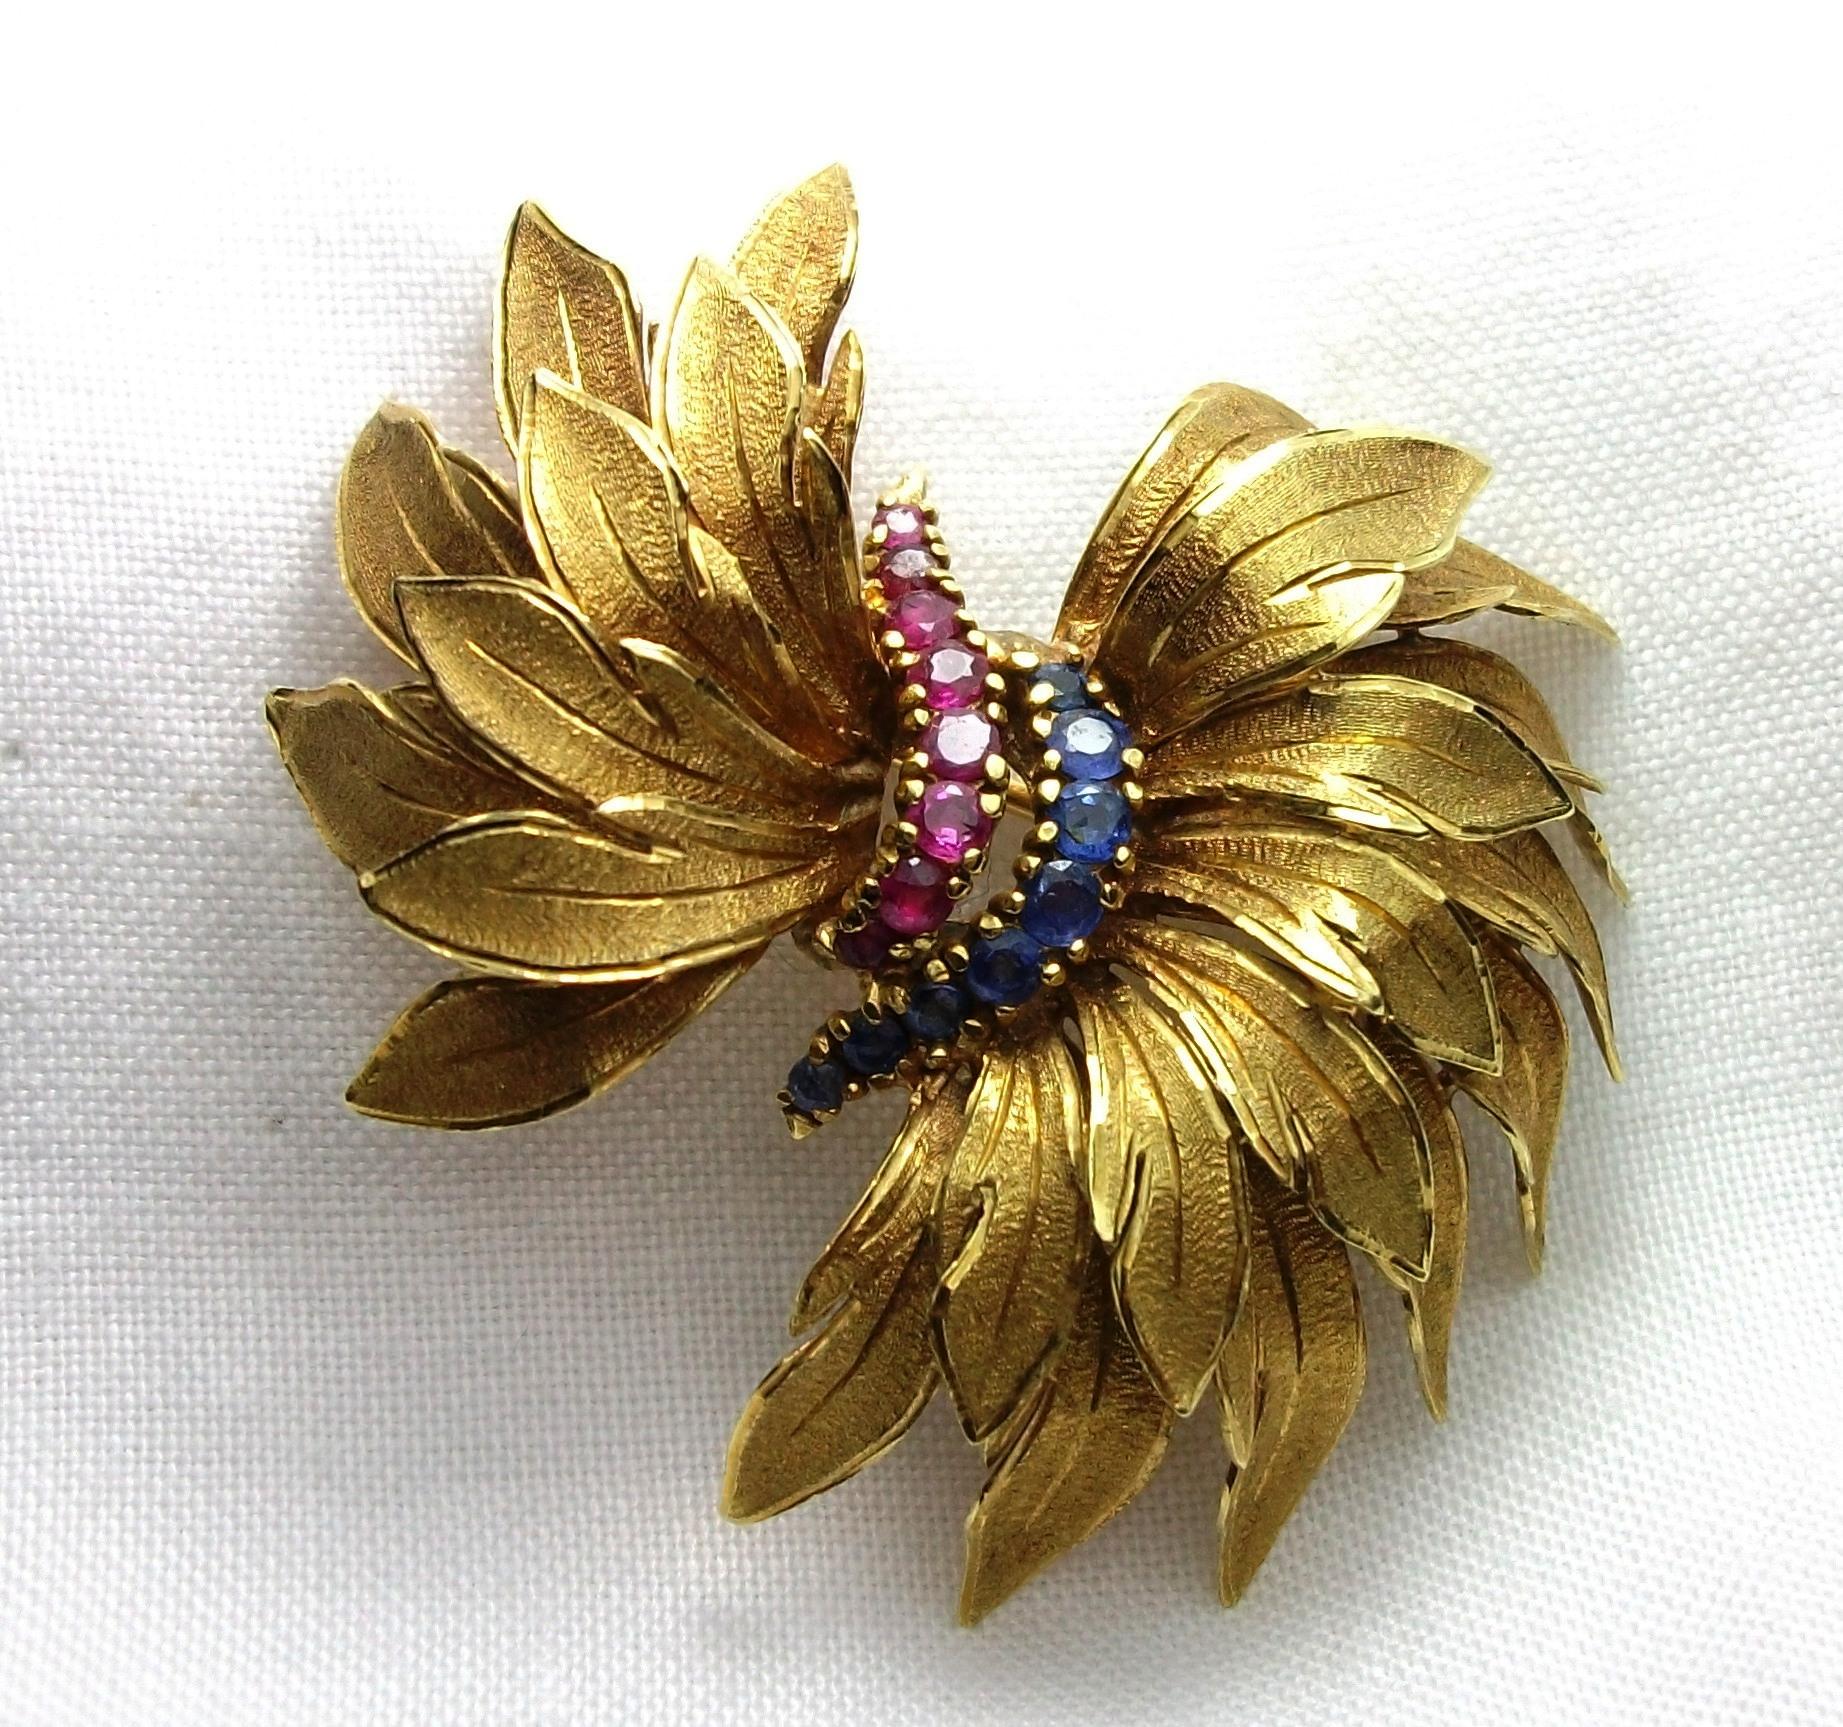 Vintage 1950s Rubies Sapphires 18 Karat Yellow Gold Bow Brooch In Excellent Condition For Sale In London, GB